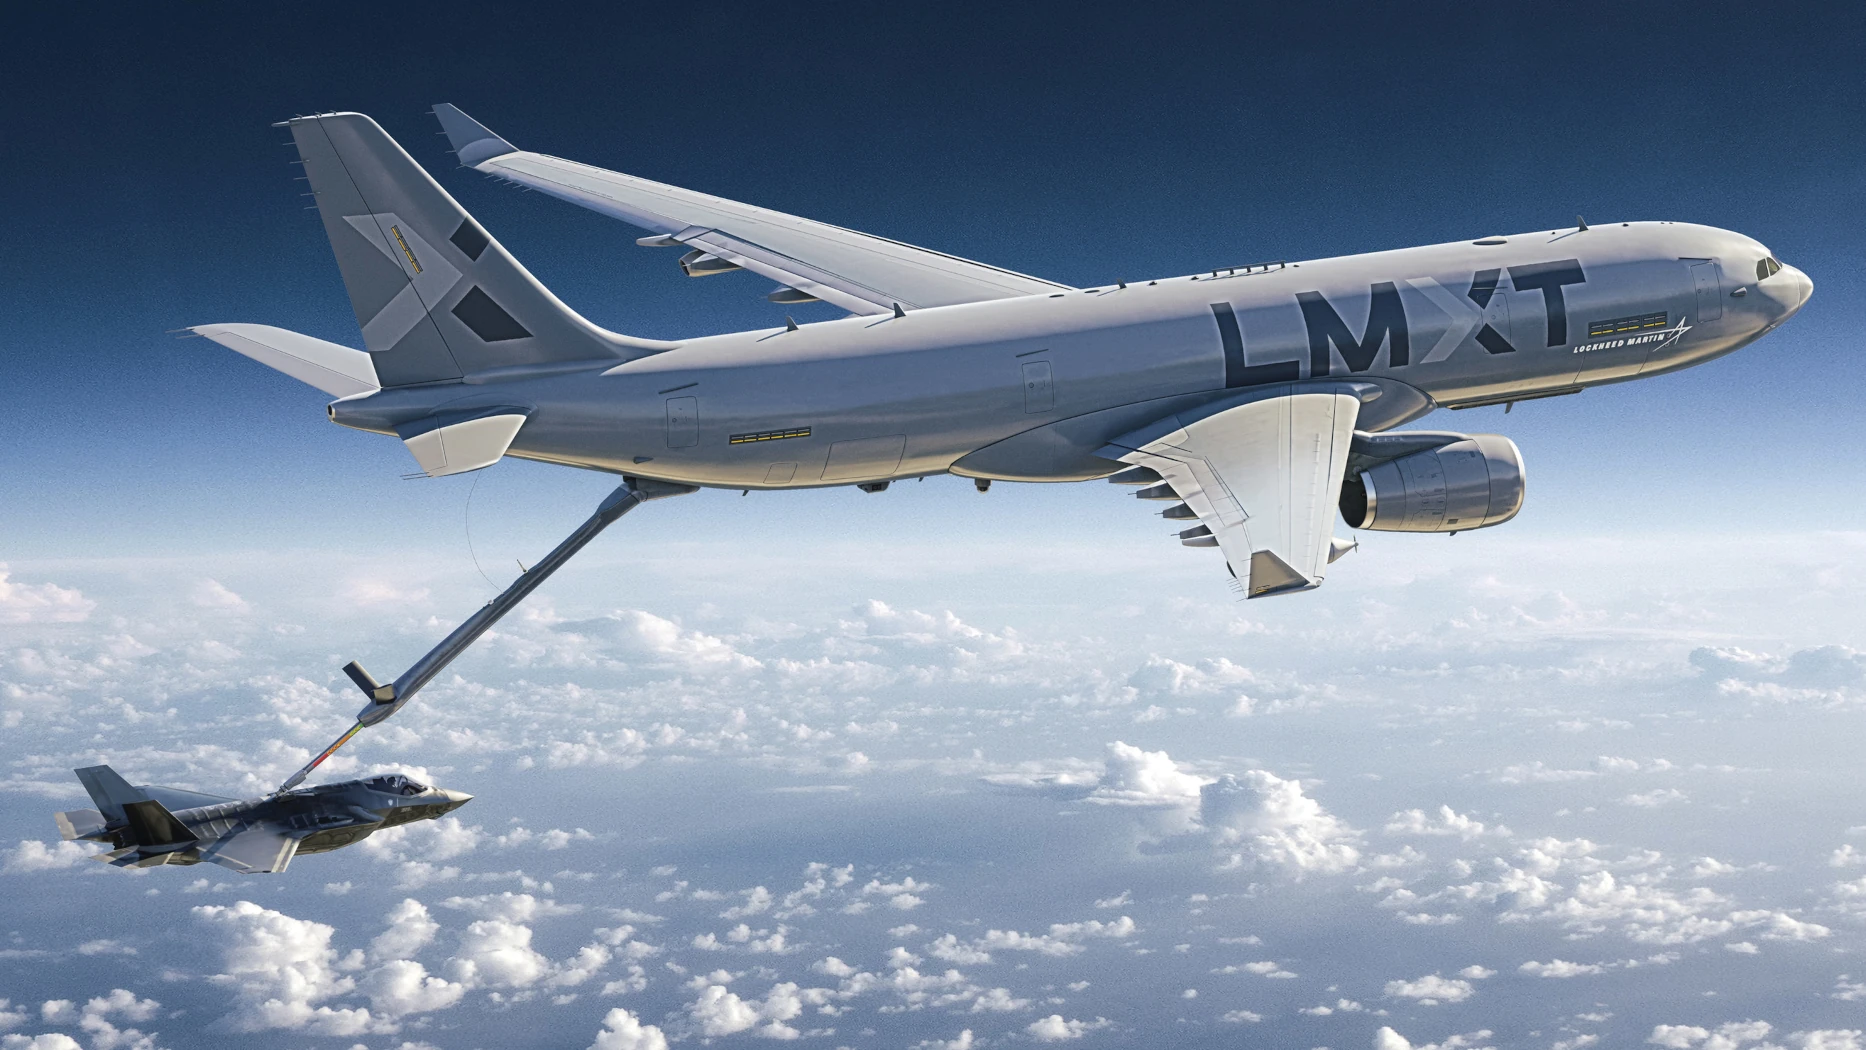 Airbus will produce the LMXT refuelling system; the KC-Y tanker program is yet to launch